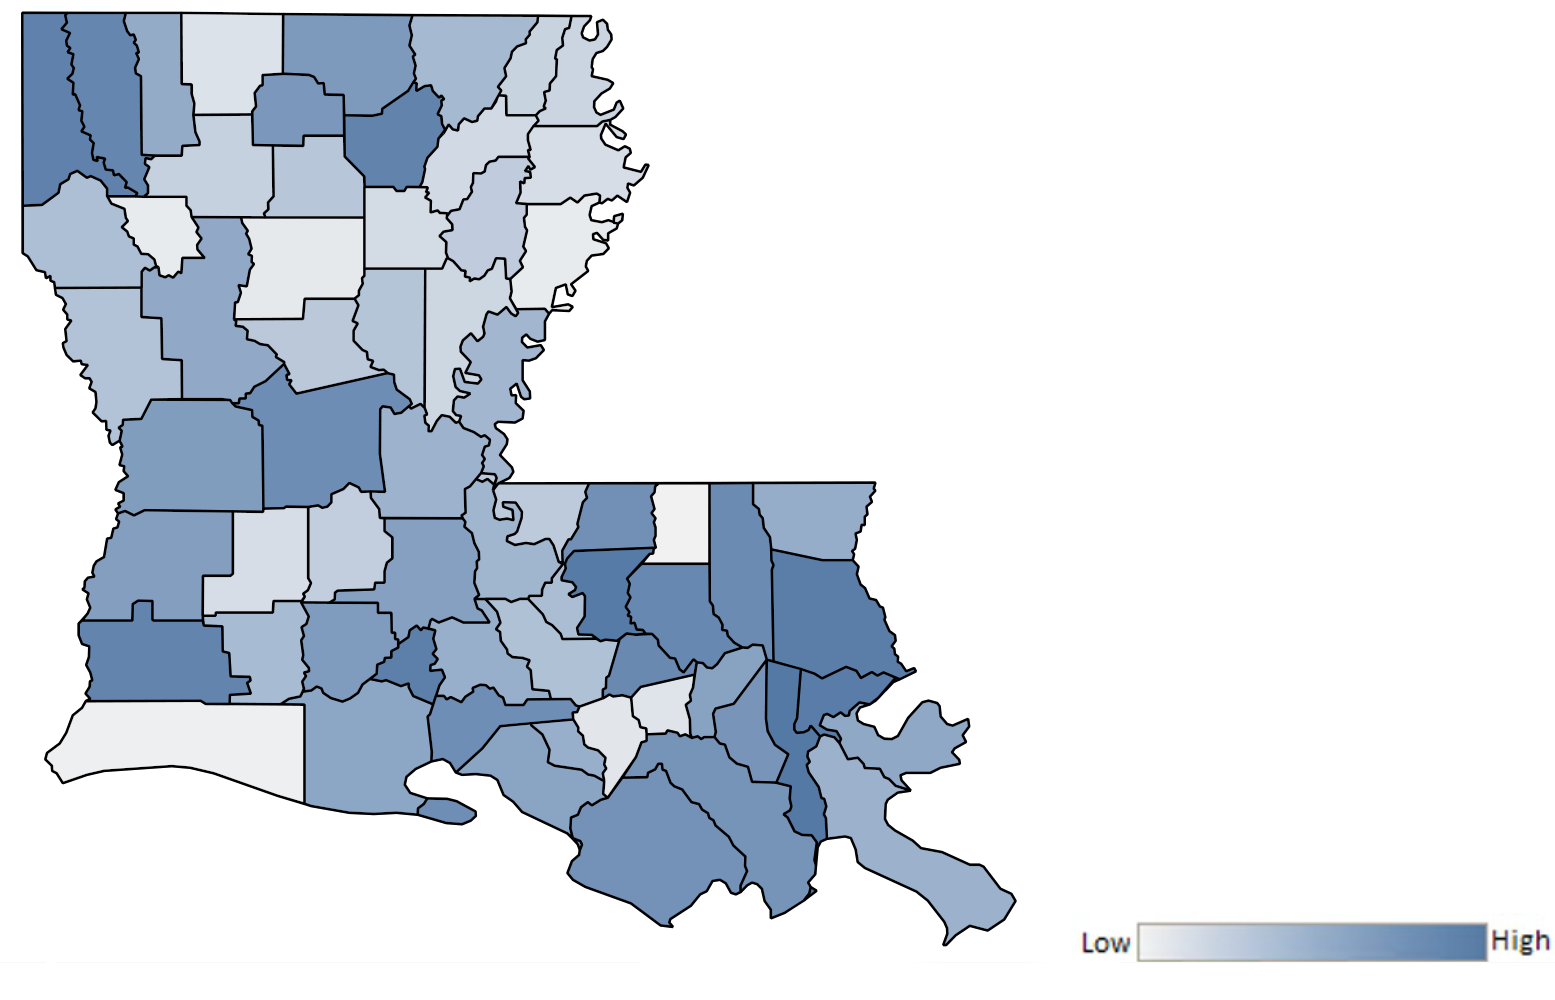 Map of Louisiana parishes indicating relative number of complaints from low to high. See attached CSV file for complaint data by jurisdiction.